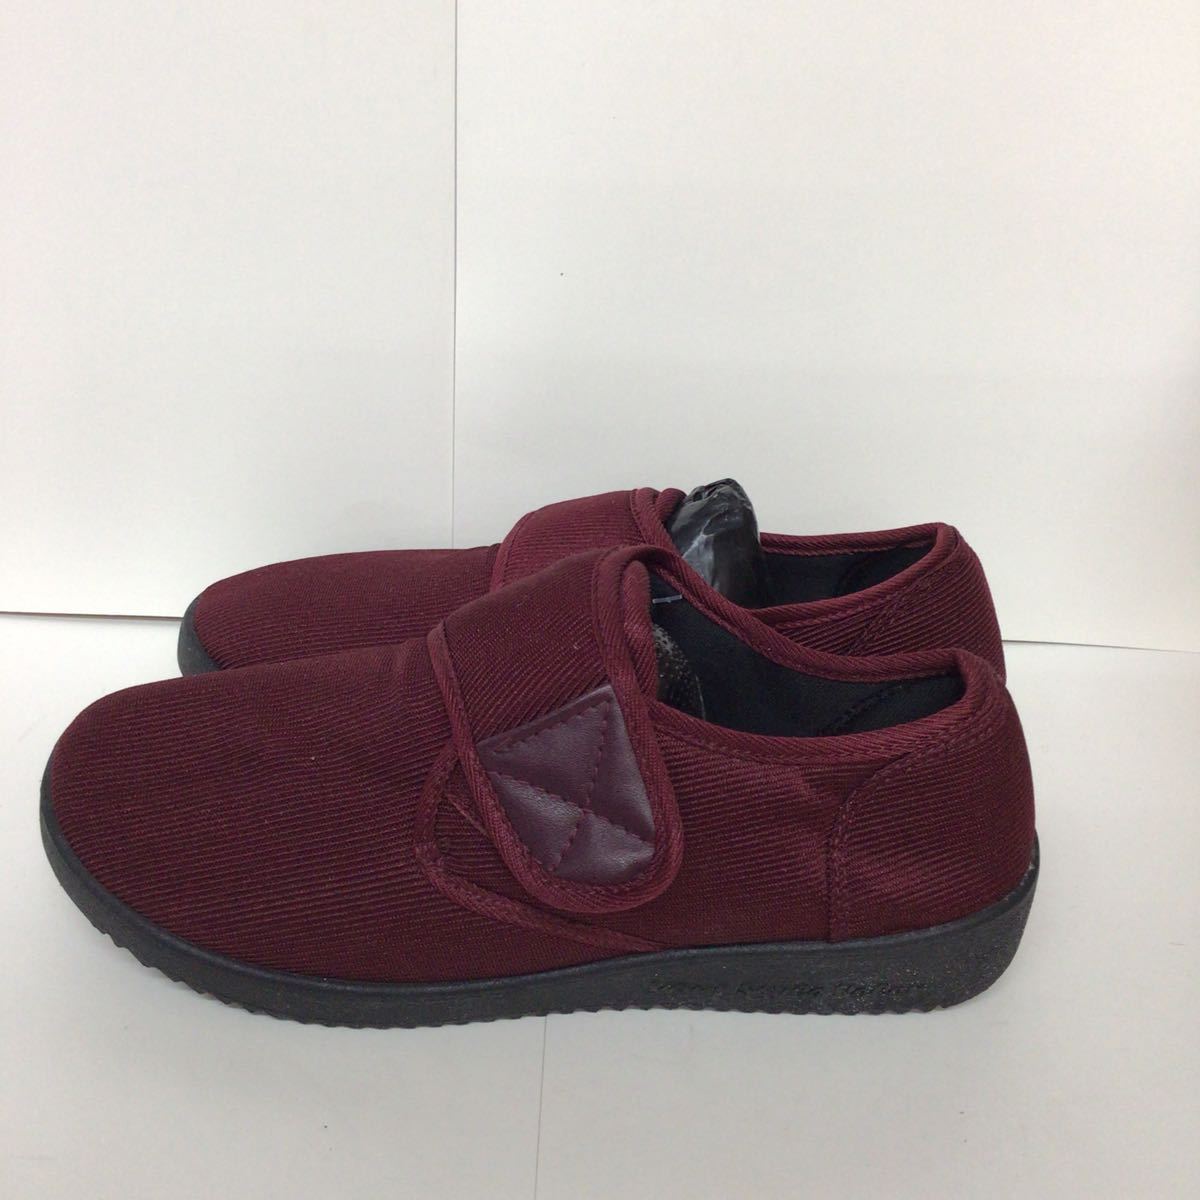 [ selling out! free shipping!]A-330 Velen! shoes!24.5! nursing shoes! red! wine red! put on footwear ...! unused!